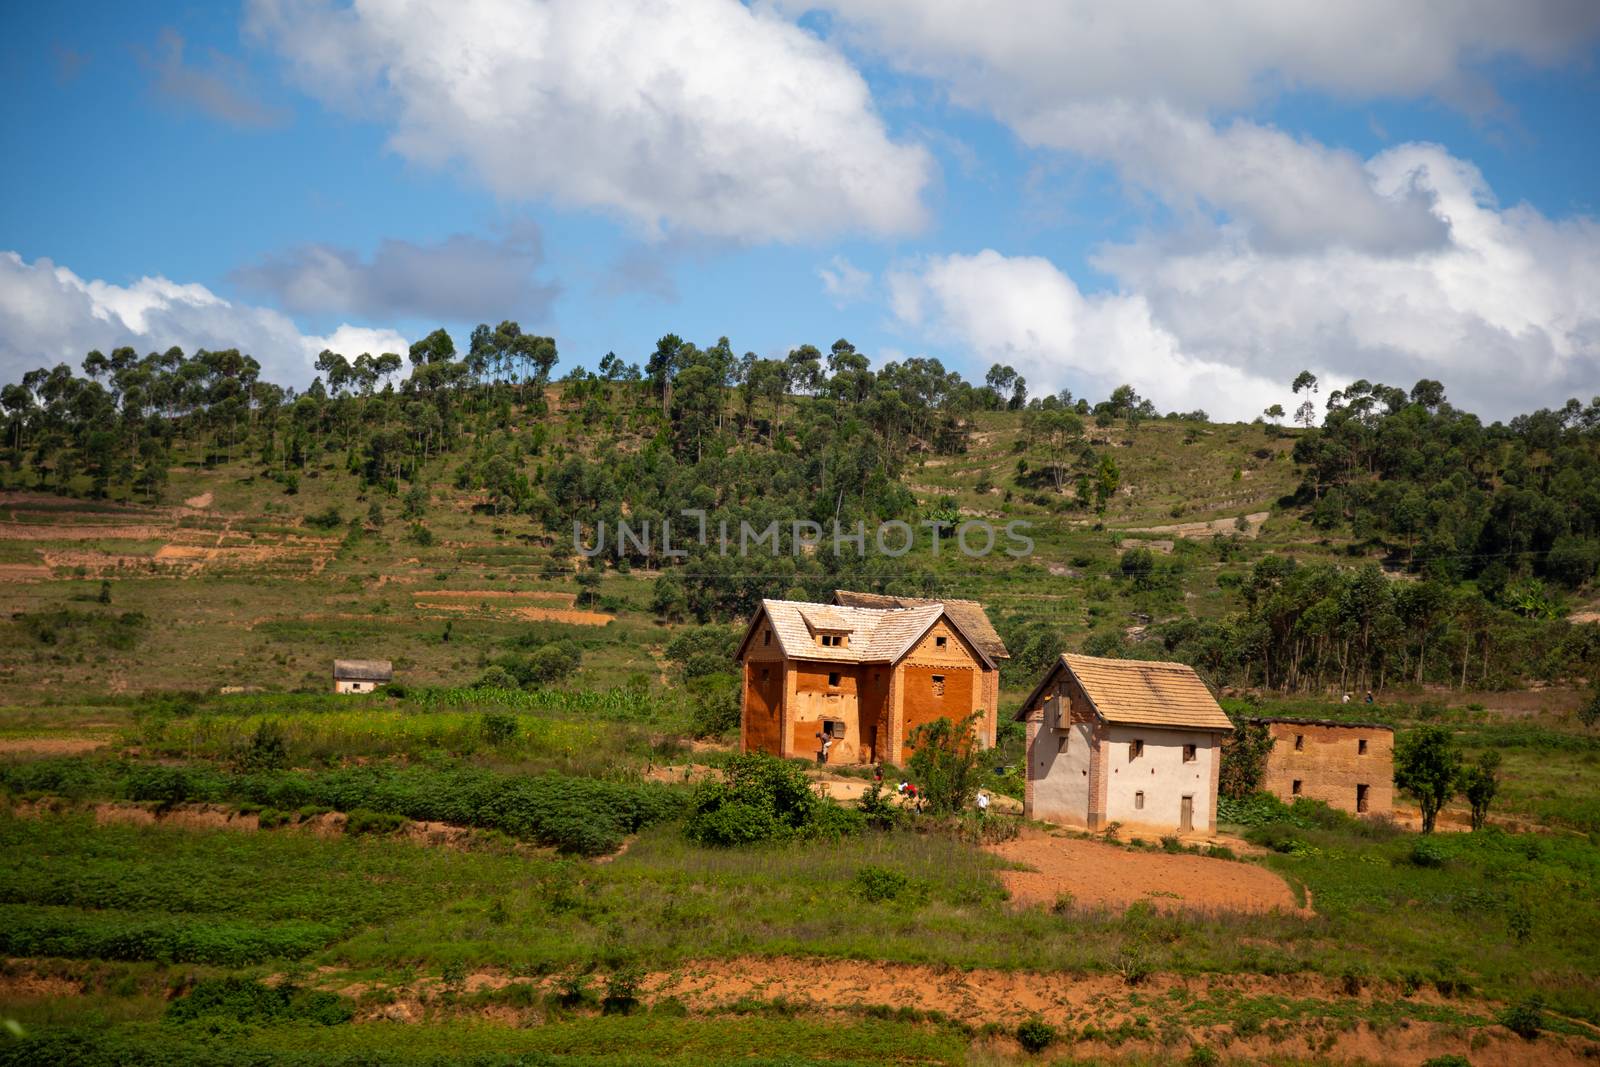 The homes of locals on the island of Madagascar by 25ehaag6